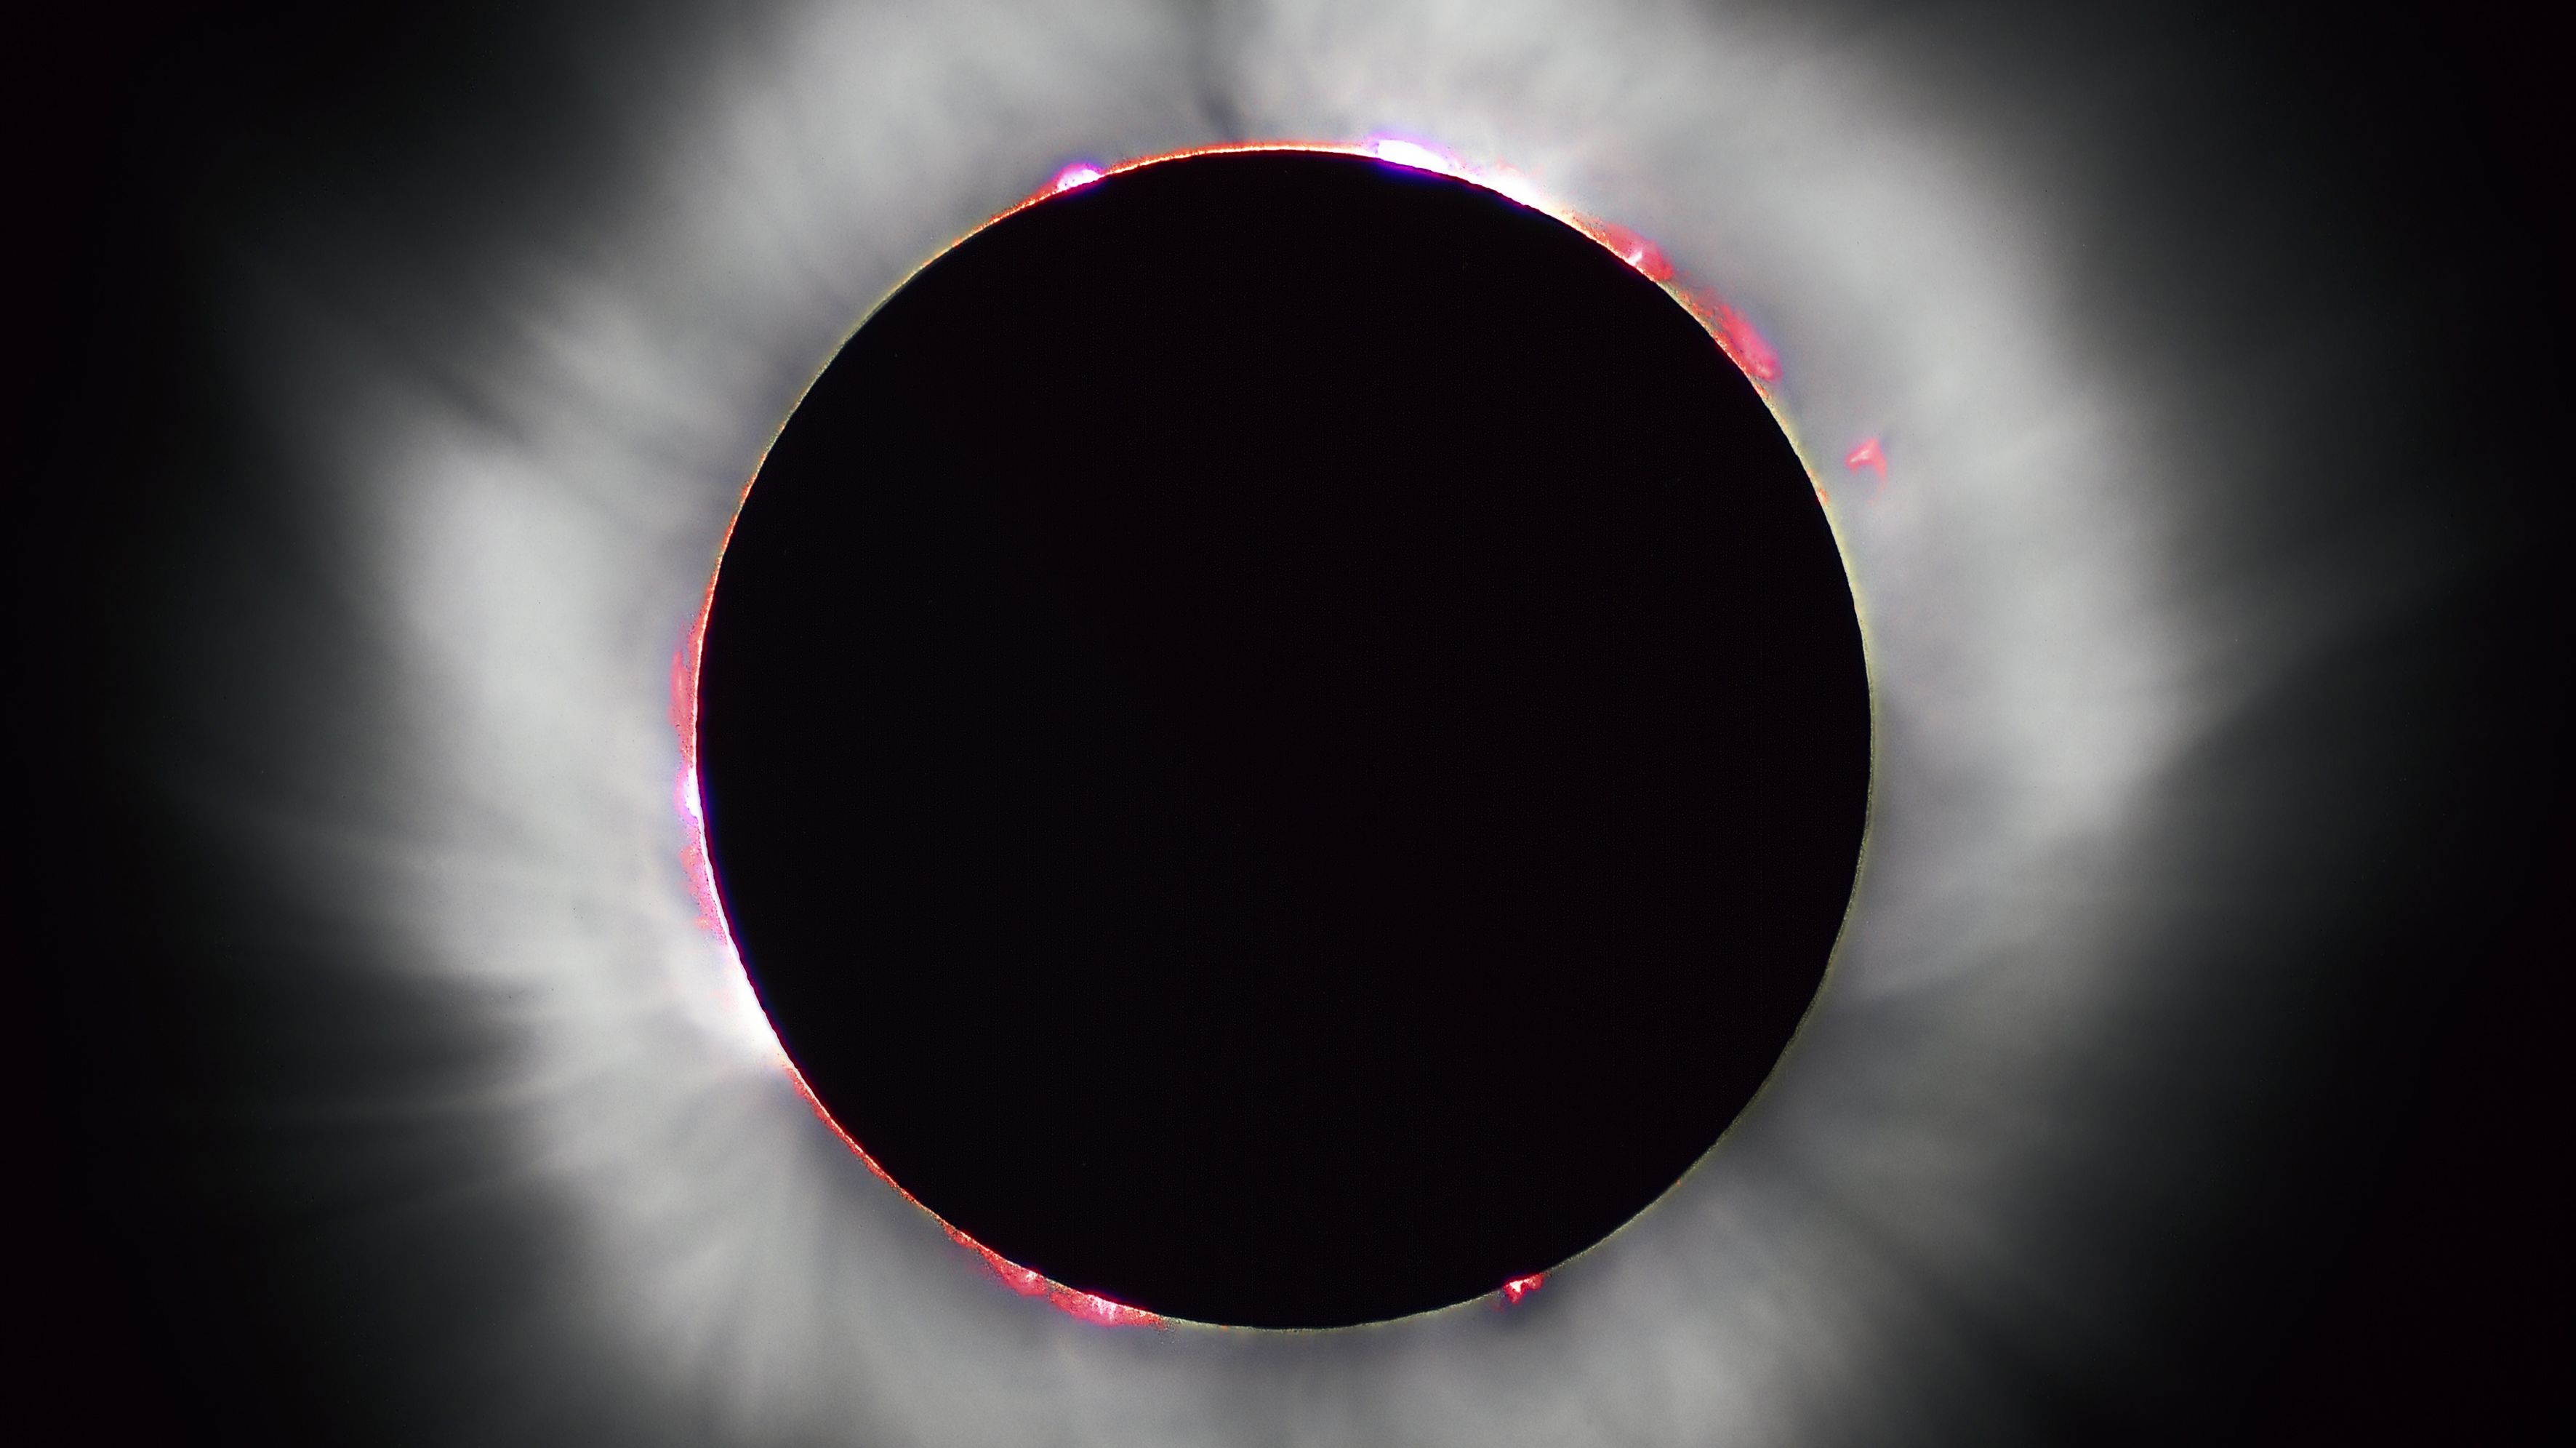 7 Tips From a Nikon Pro for Photographing the Total Solar Eclipse